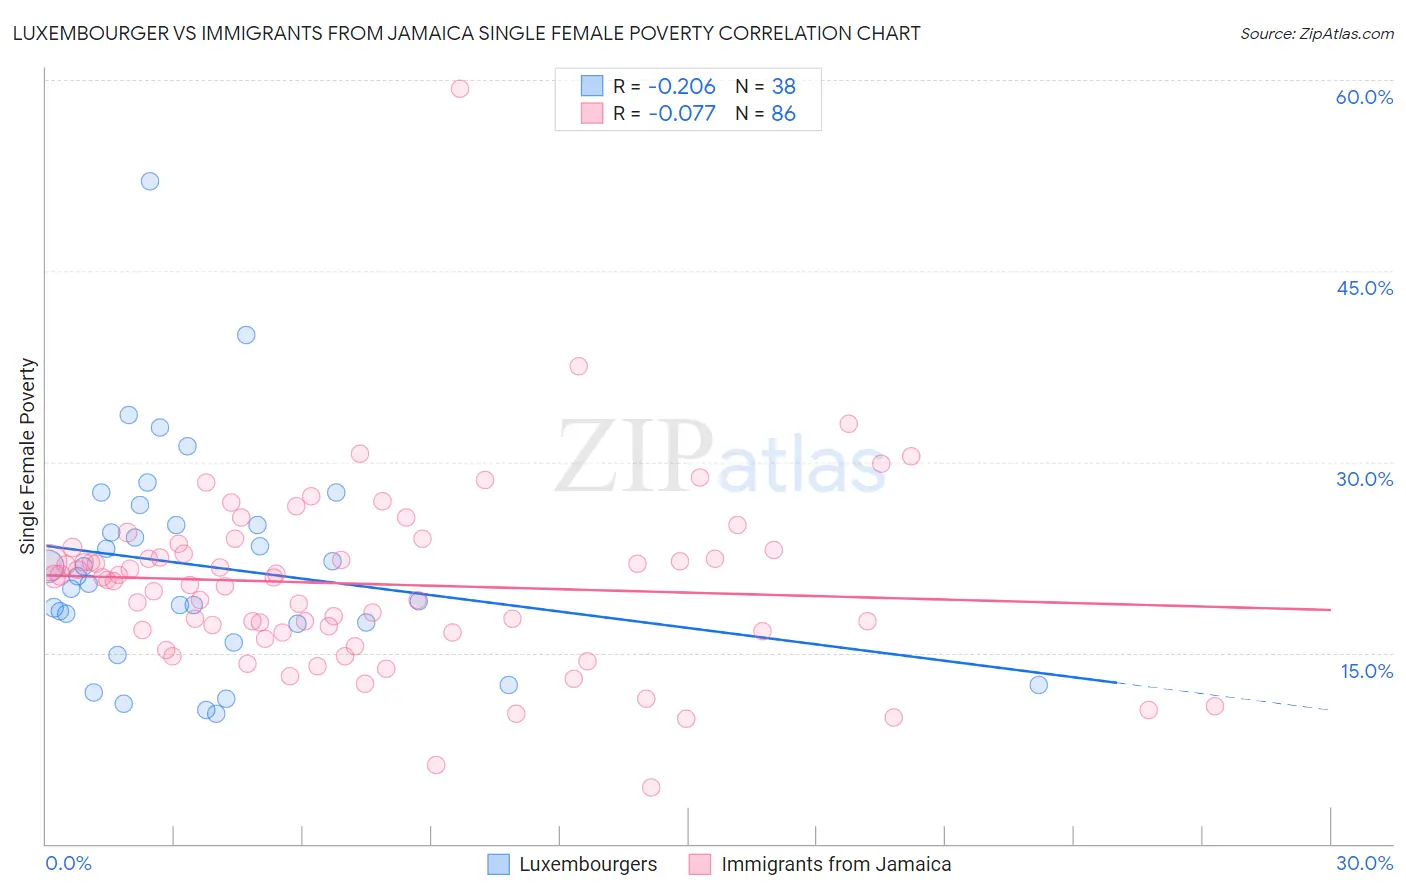 Luxembourger vs Immigrants from Jamaica Single Female Poverty